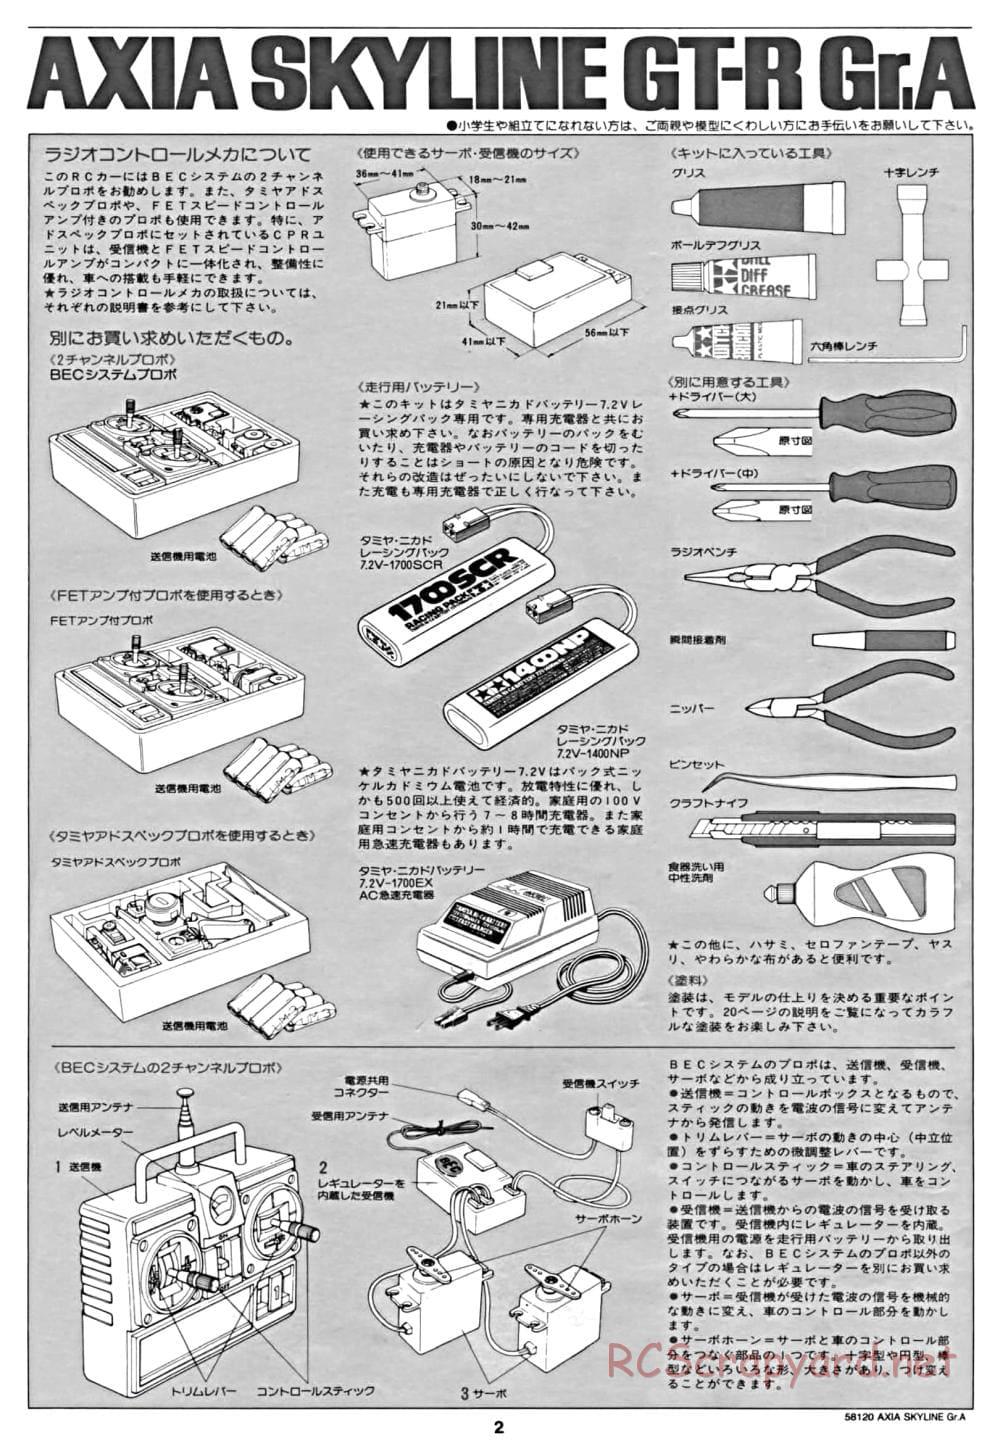 Tamiya - Axia Skyline GT-R Gr.A - TA-01 Chassis - Manual - Page 2